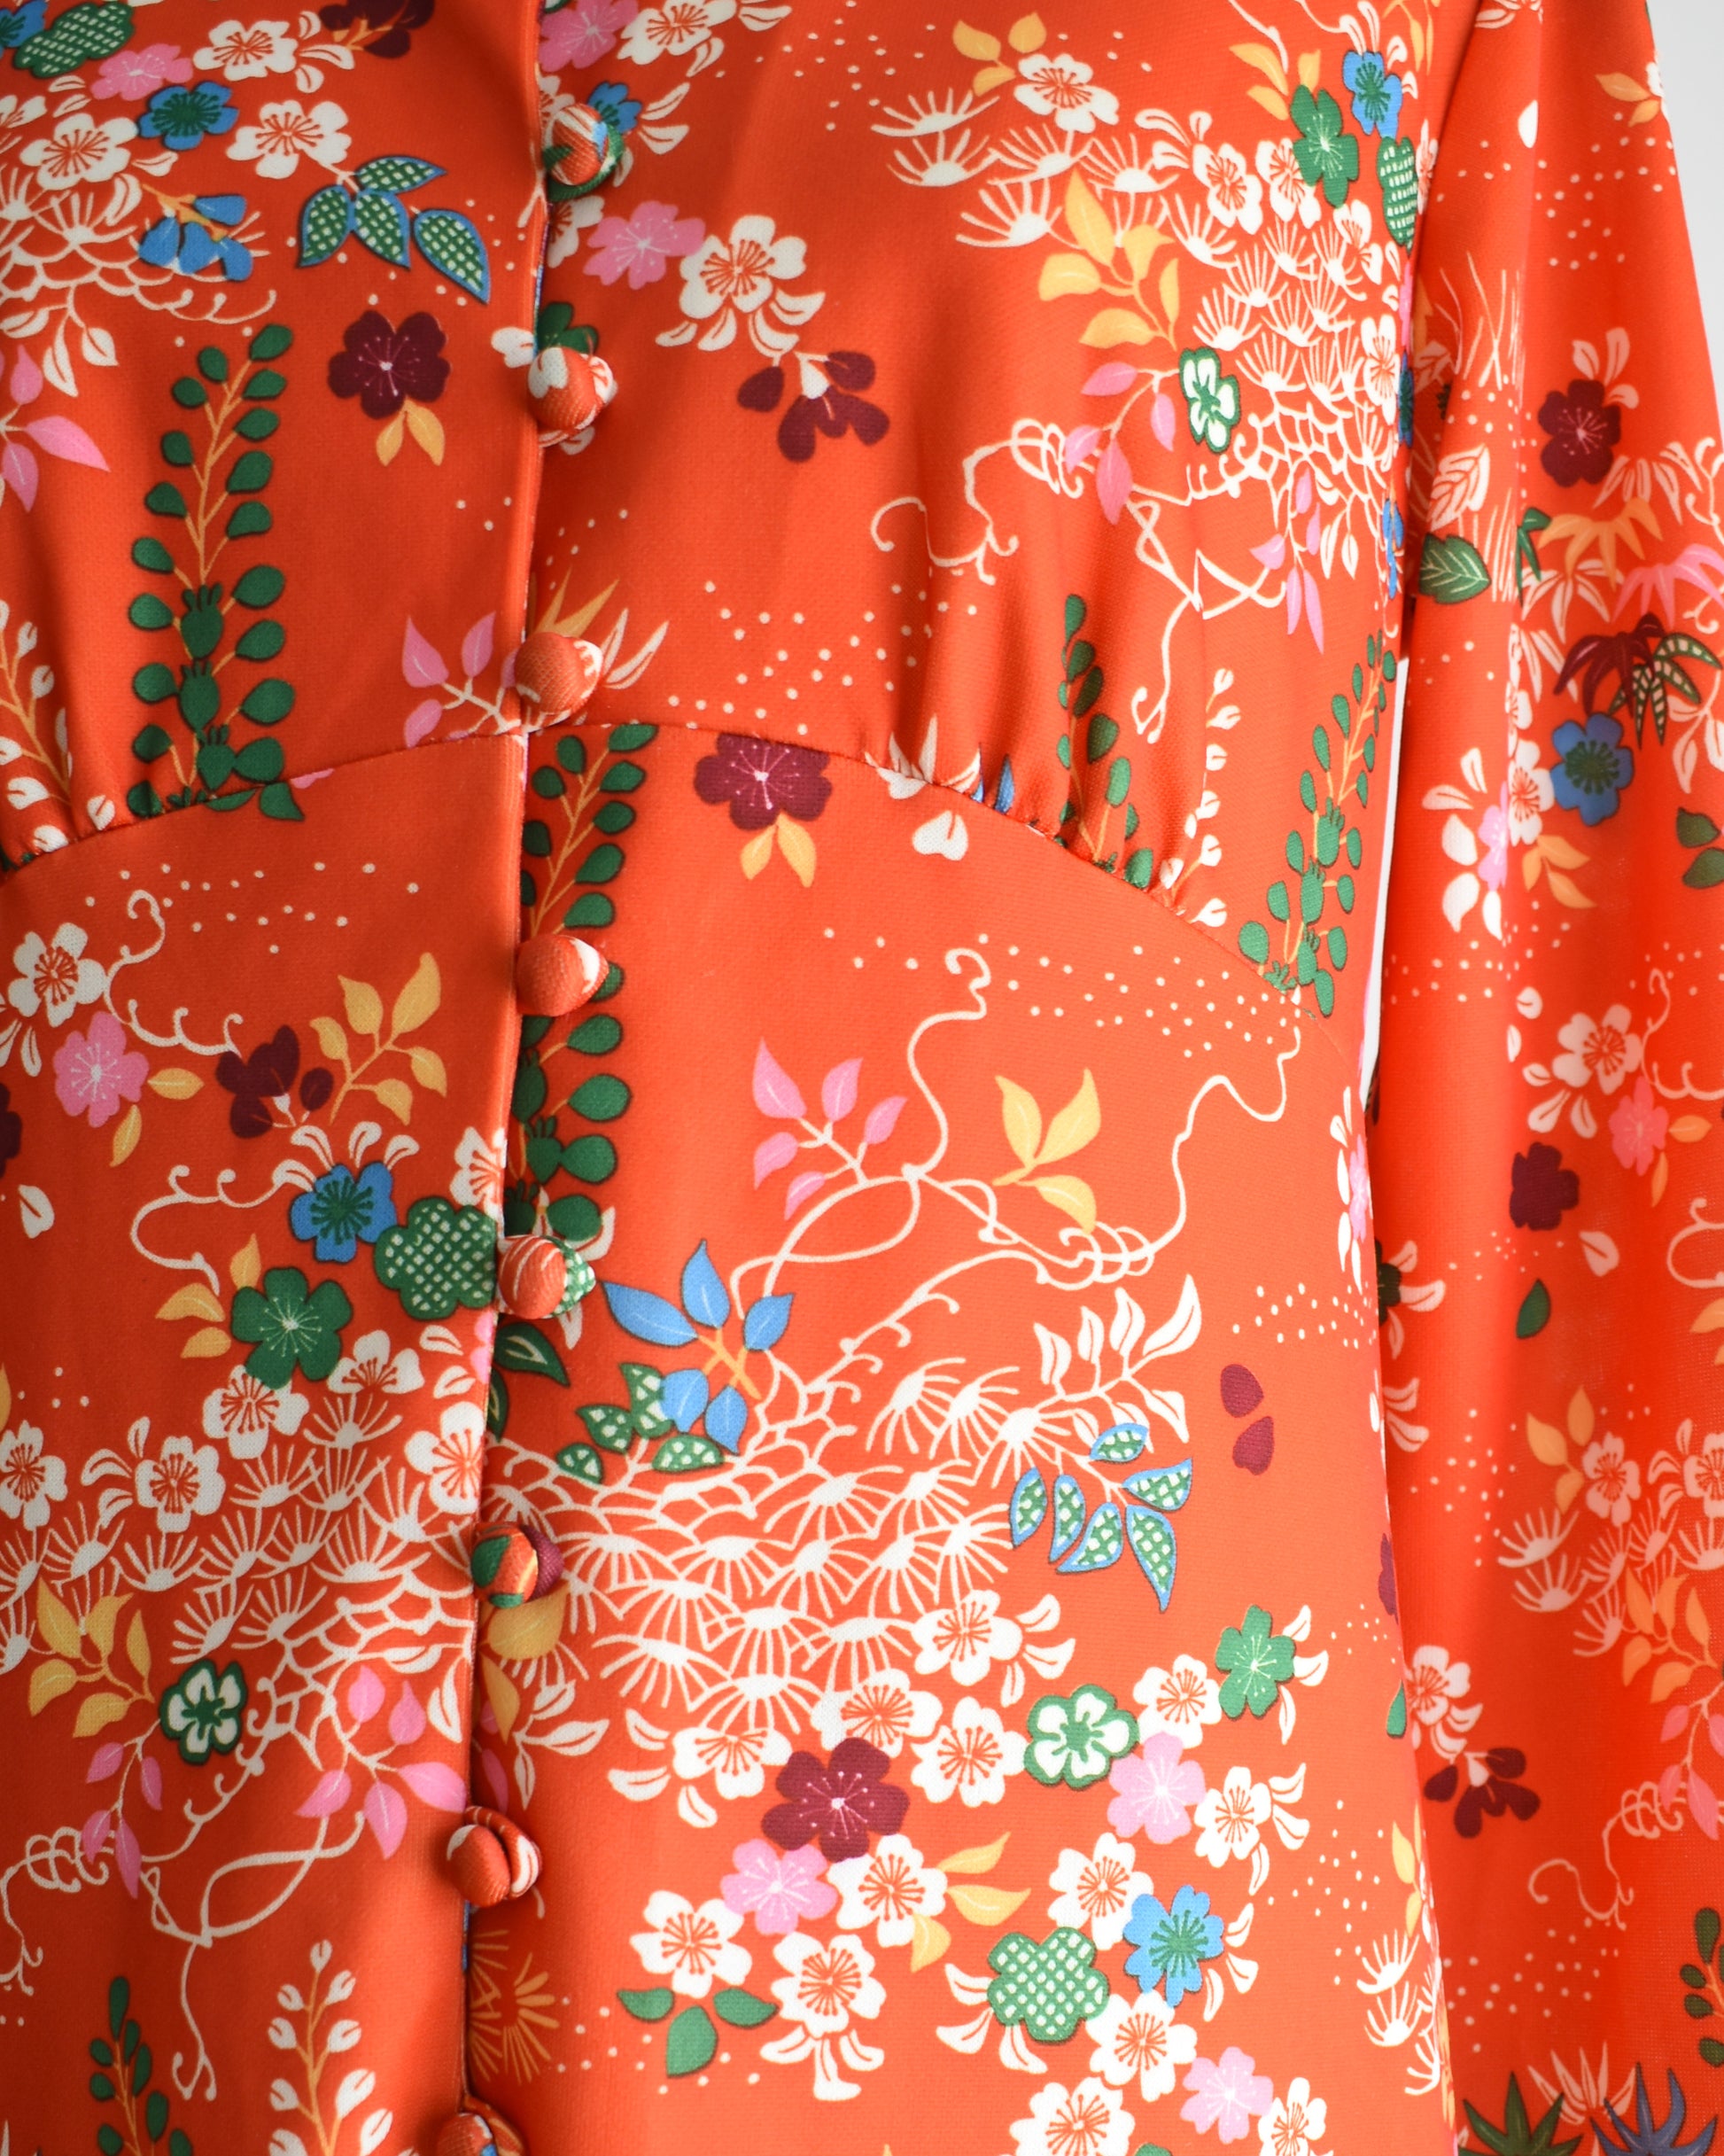 Close up of the floral print, buttons, and empire waist.